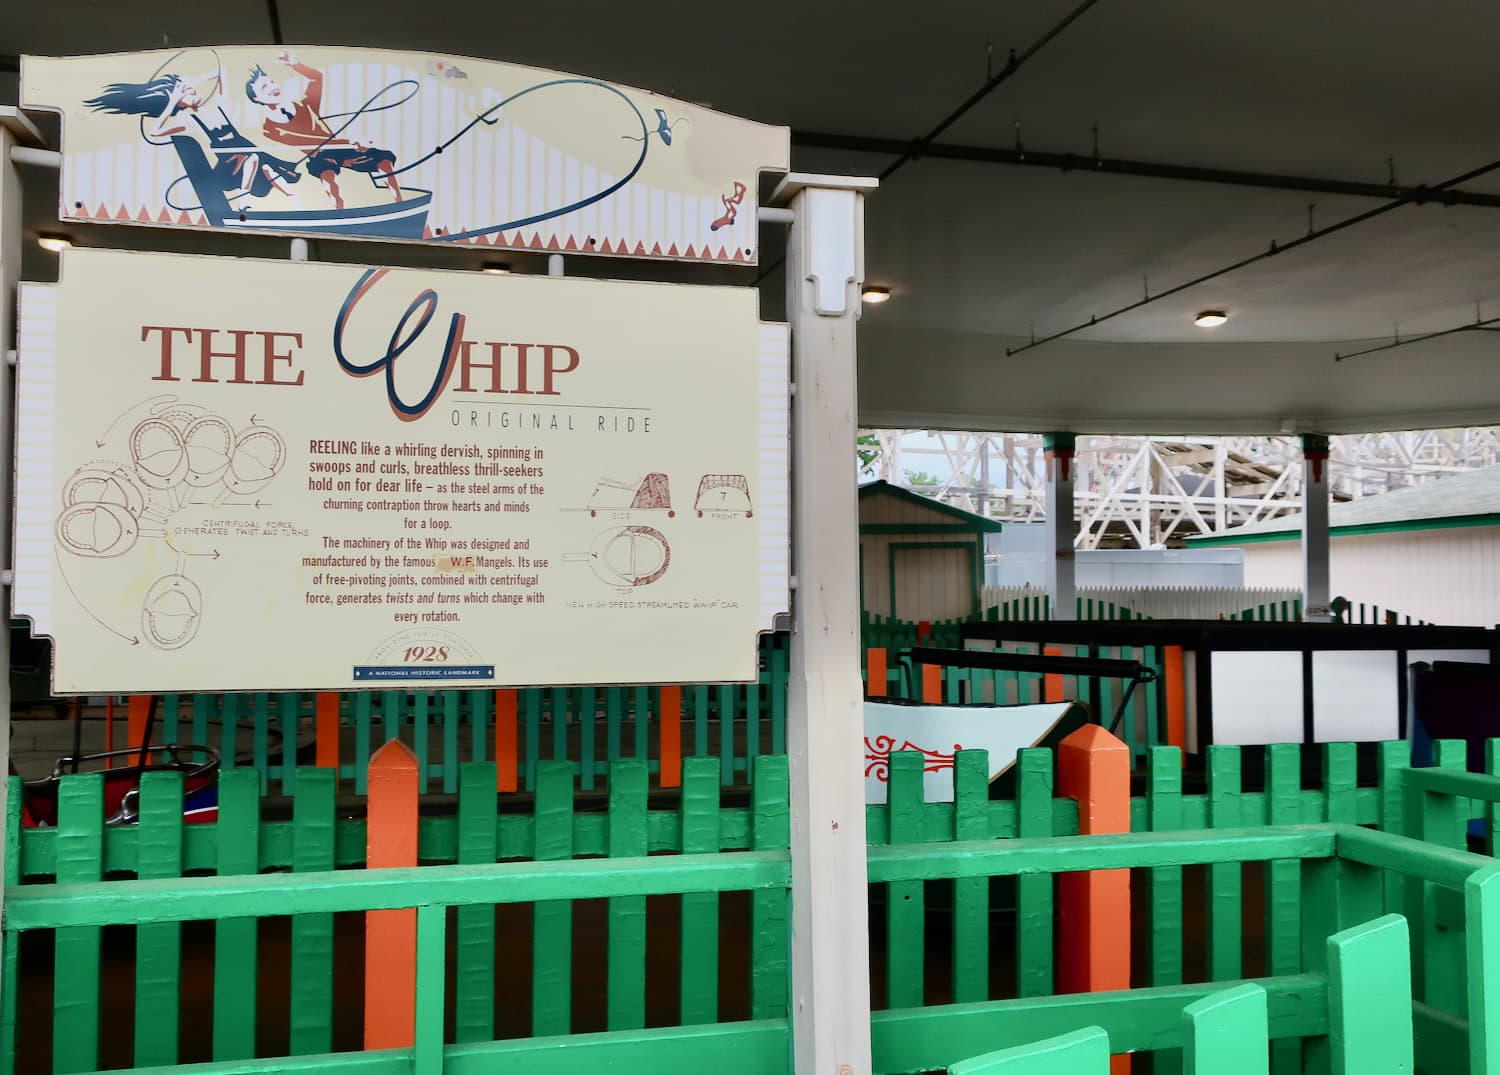 The Whip ride at Rye Playland since 1928